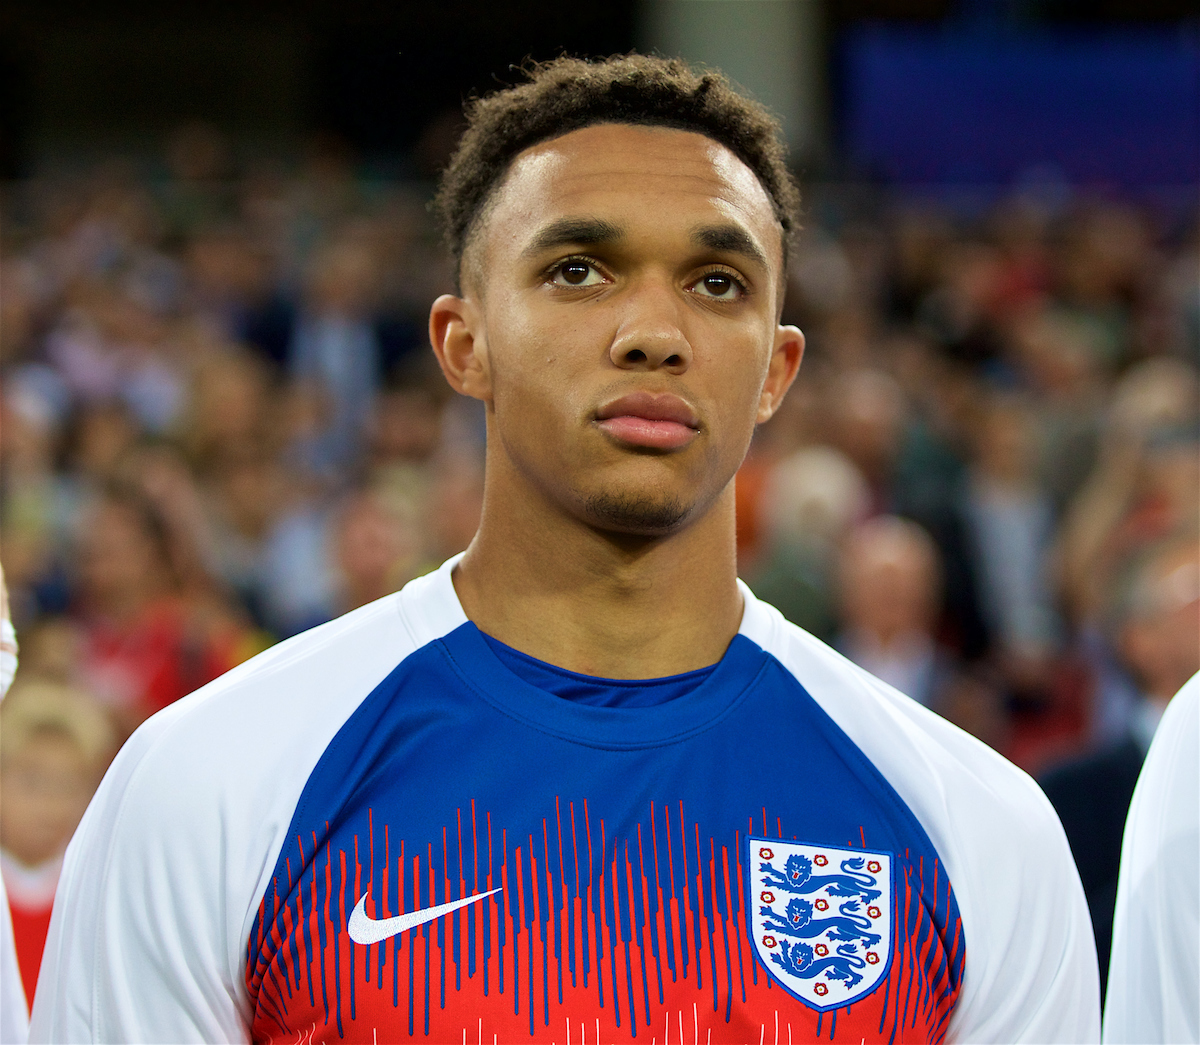 England's substitute Liverpool full-back Trent Alexander-Arnold on the bench before the FIFA World Cup Russia 2018 Round of 16 match between Colombia and England at the Spartak Stadium